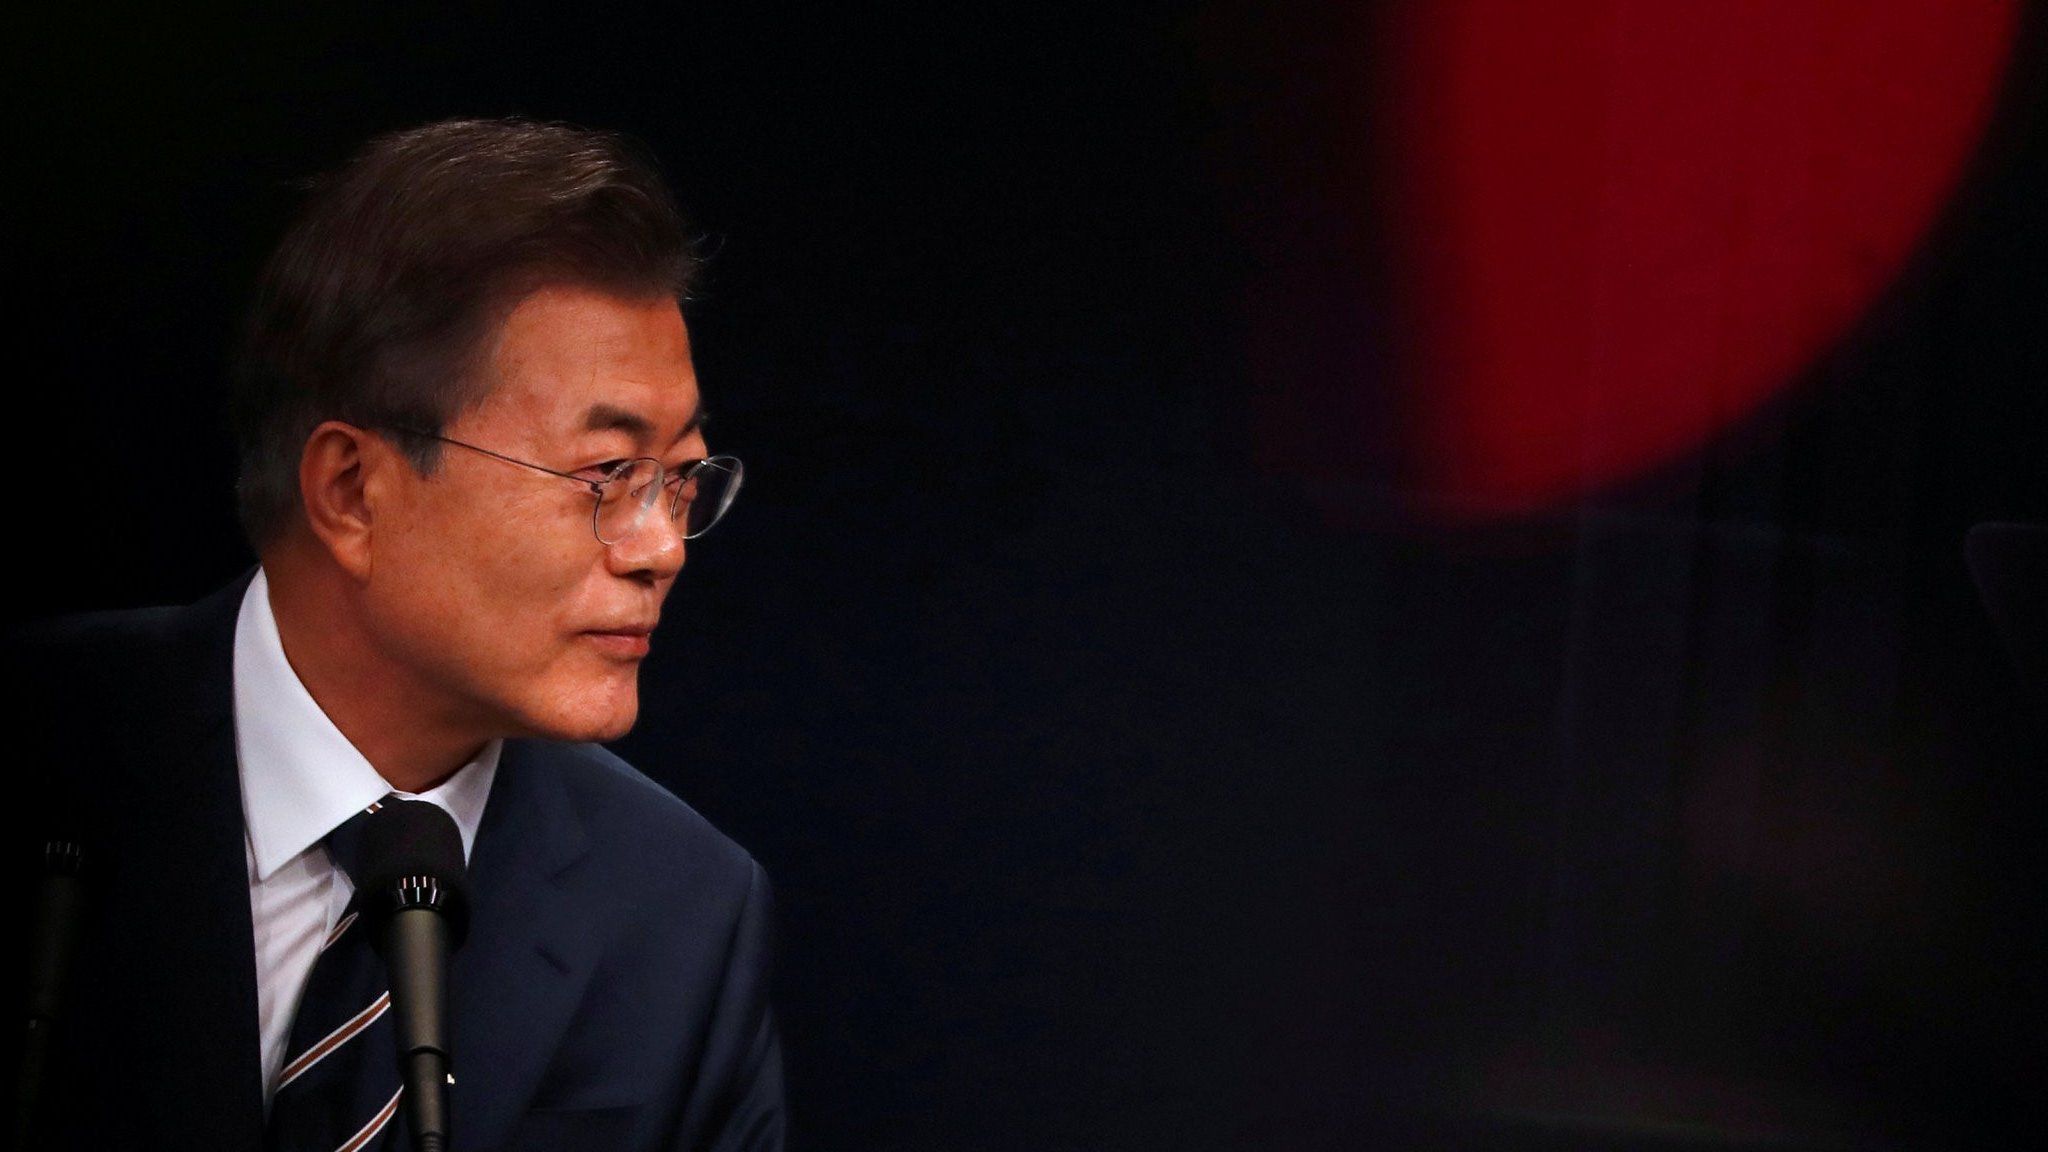 South Korean President Moon Jae-in speaks during a news conference at the Presidential Blue House in Seoul, South Korea, May 27, 2018.